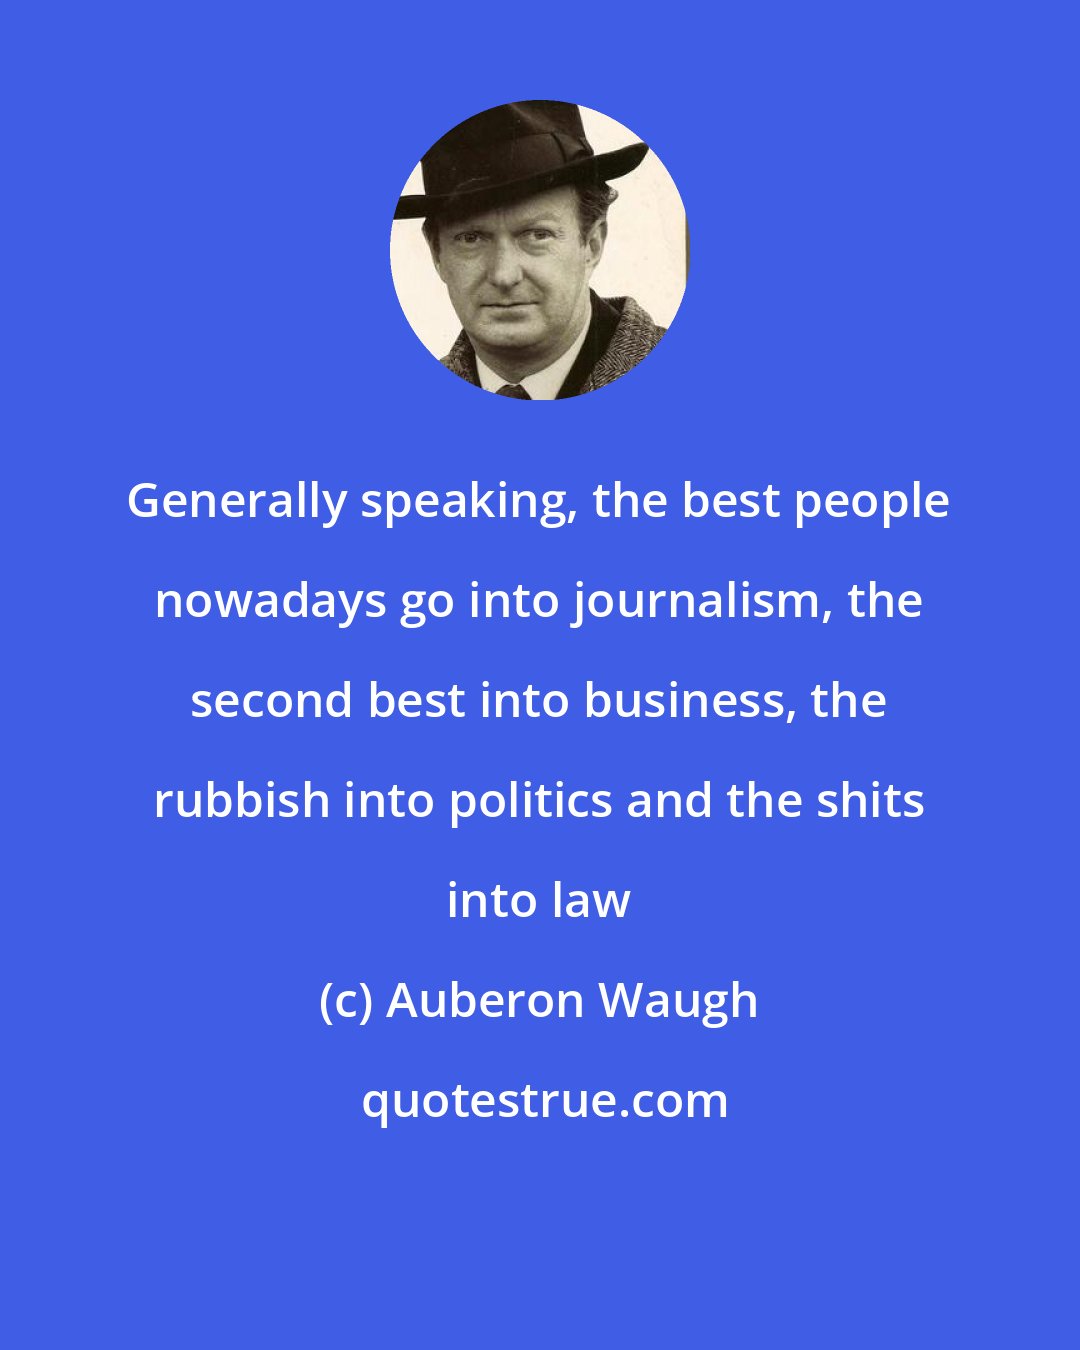 Auberon Waugh: Generally speaking, the best people nowadays go into journalism, the second best into business, the rubbish into politics and the shits into law